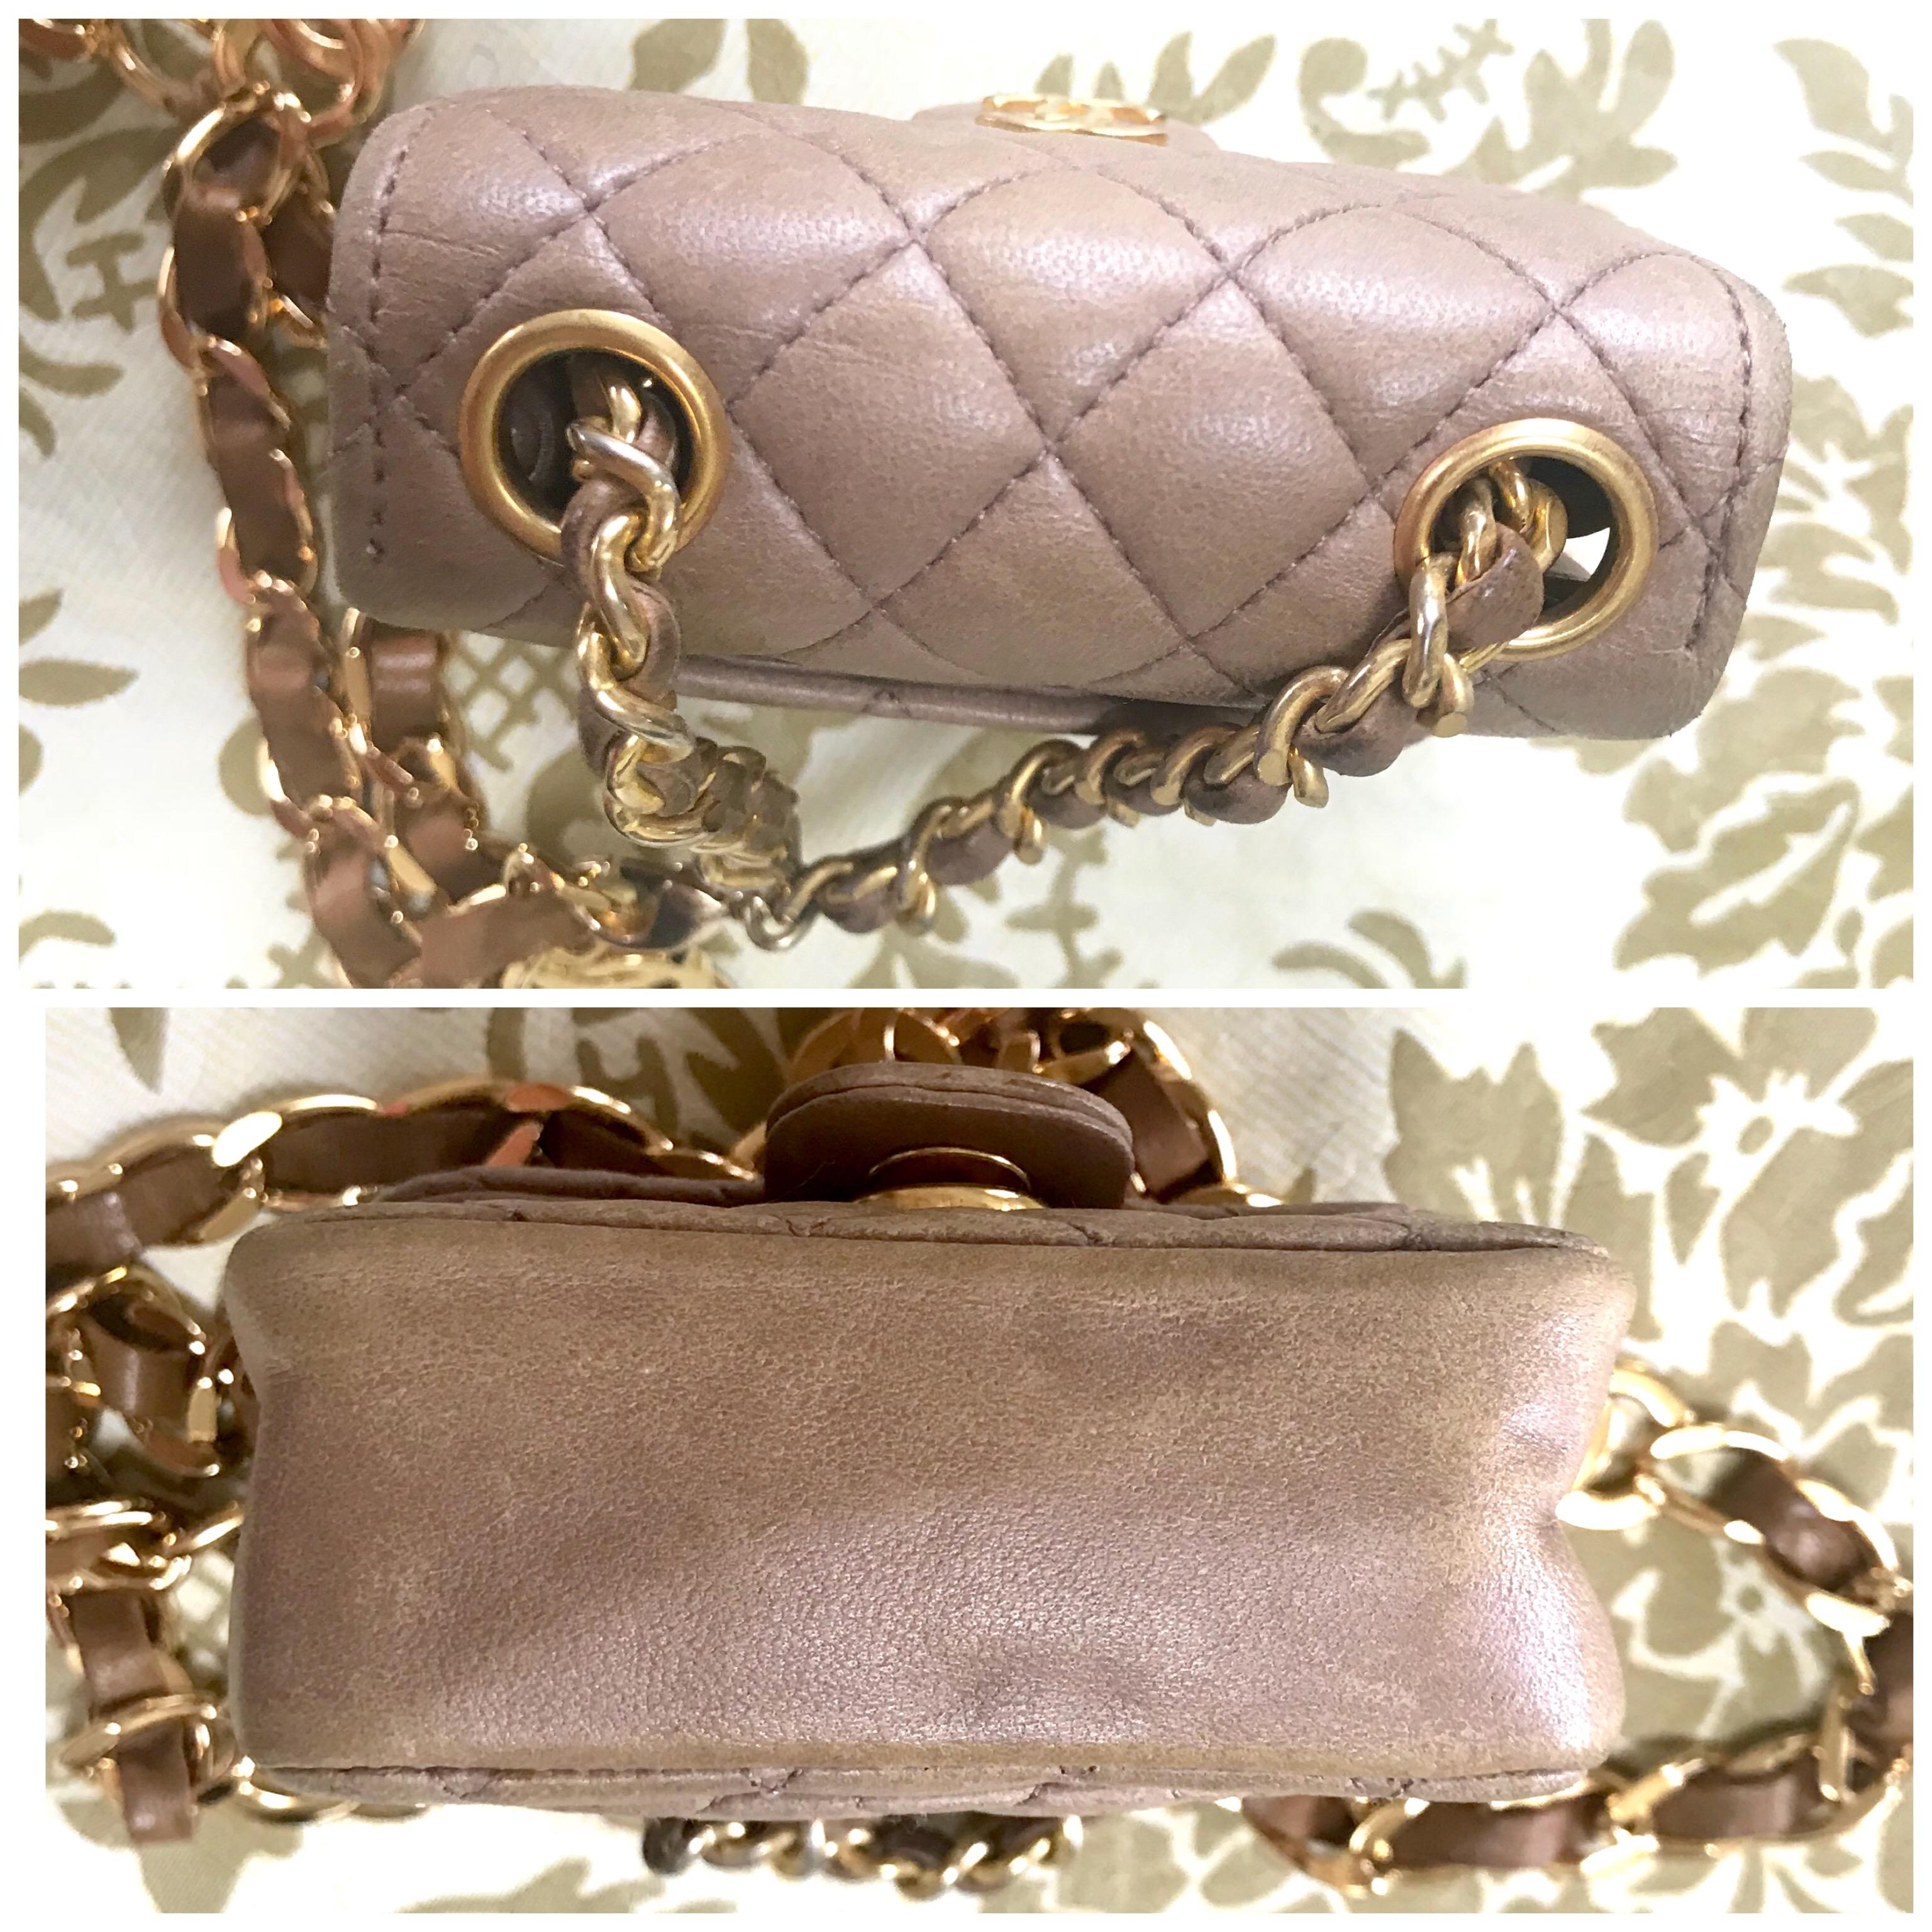 Chanel Vintage brown lambskin mini 2.55 bag charm and golden chain belt with CC For Sale 6